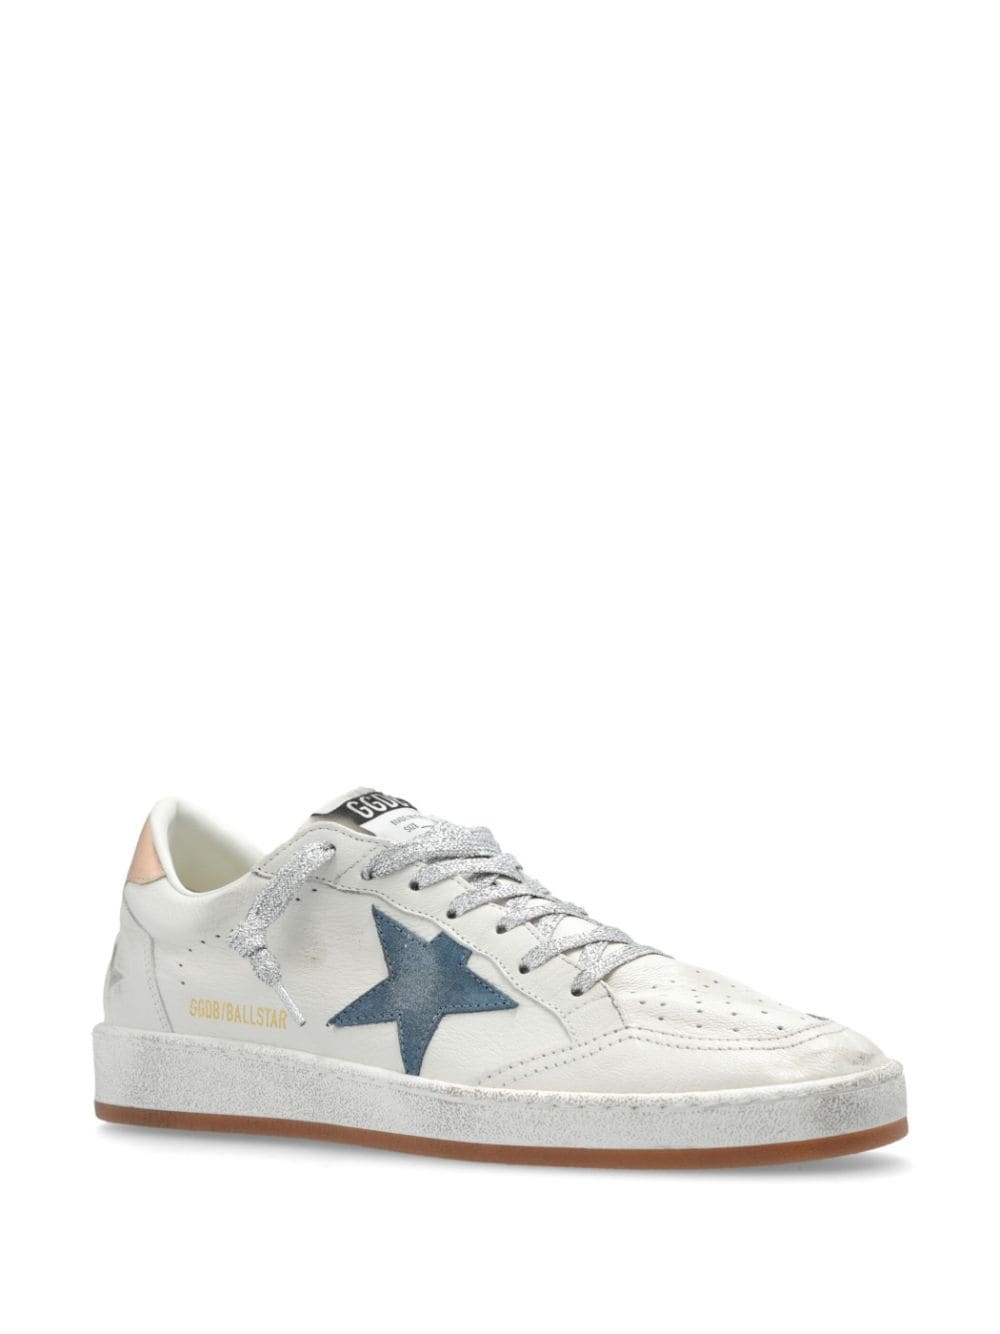 Ball Star distressed leather sneakers - 2